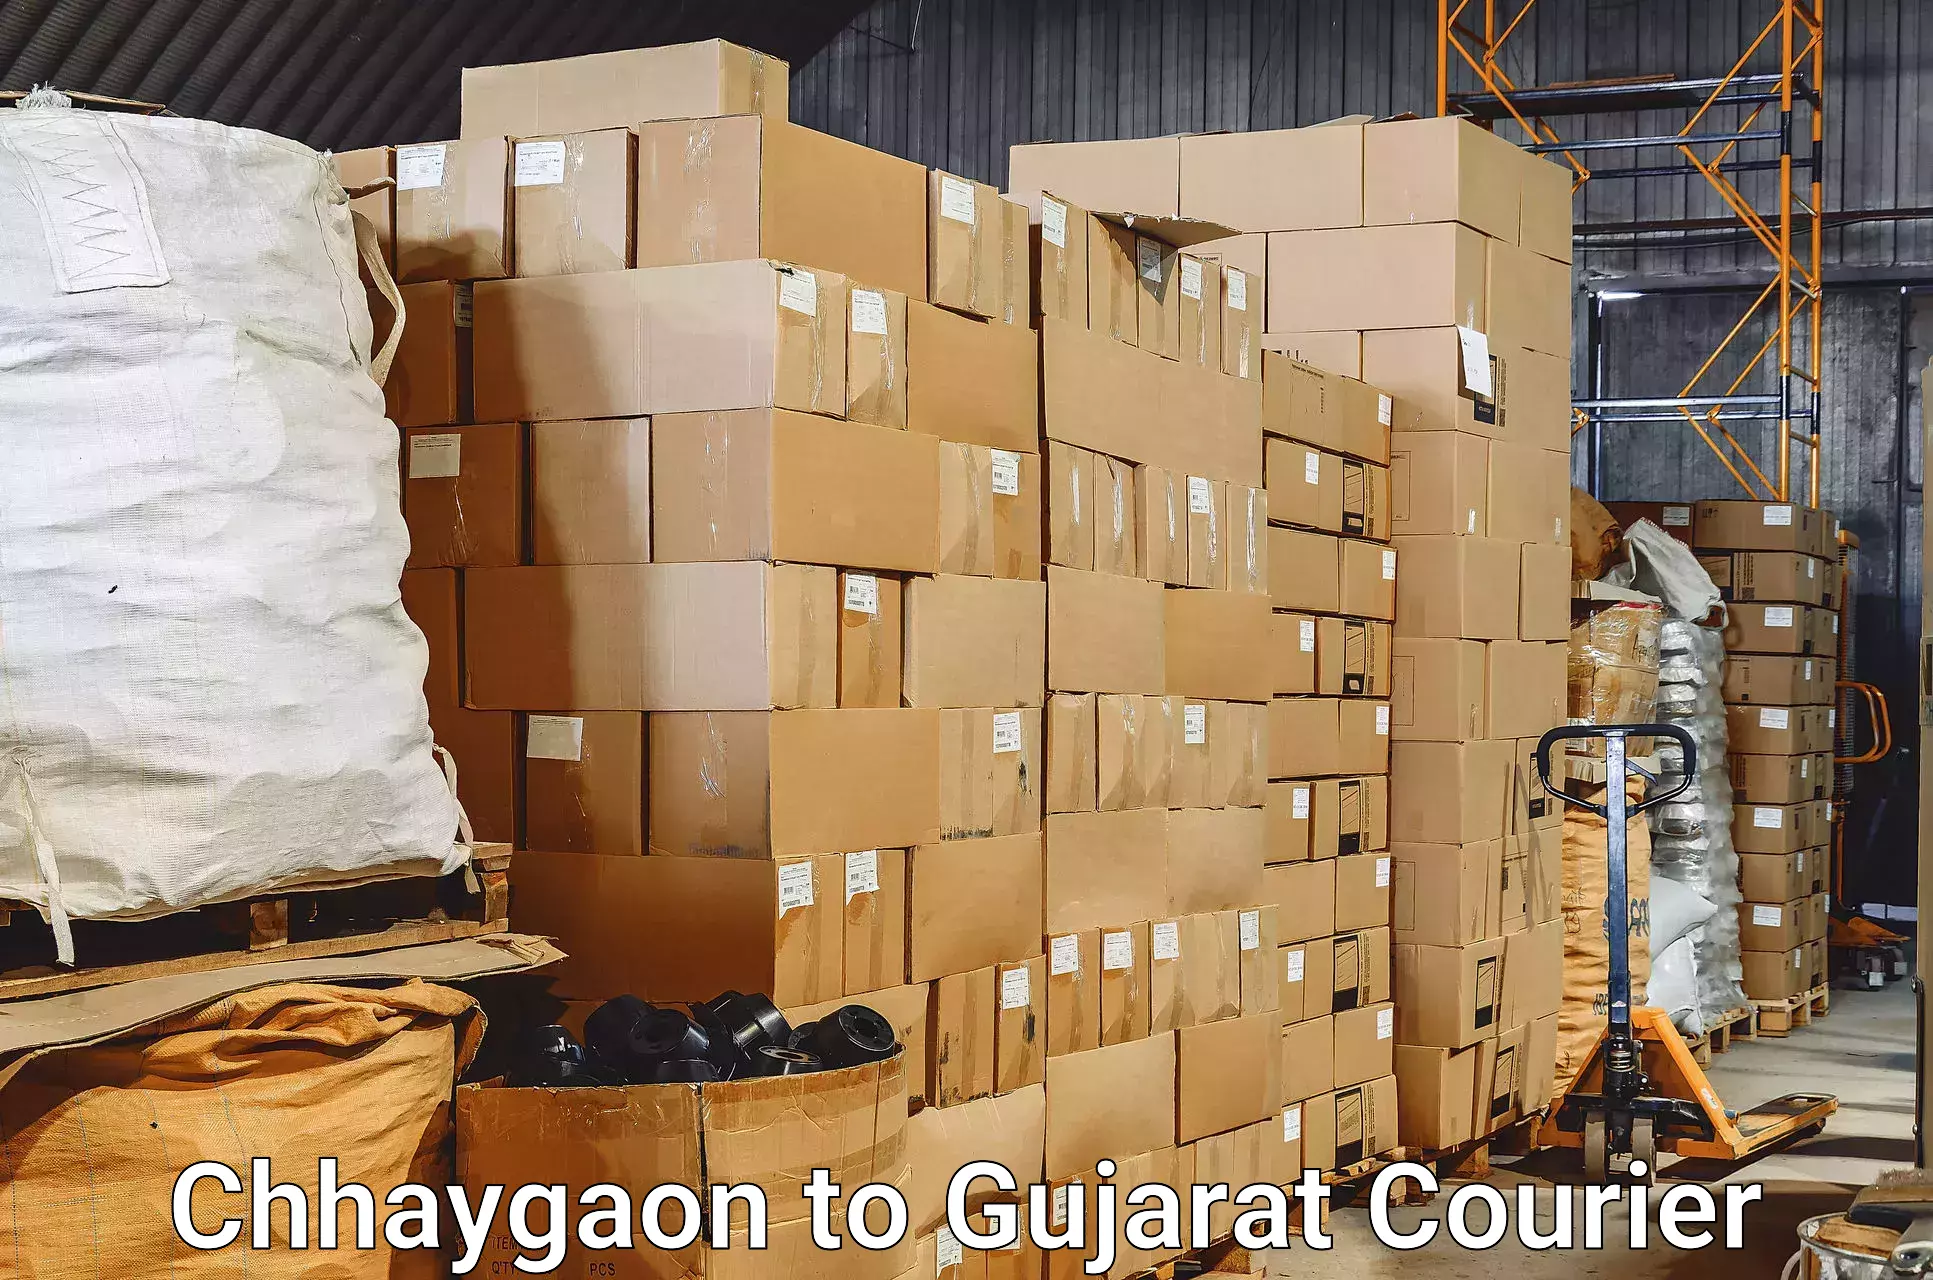 Same day baggage transport in Chhaygaon to Ahmedabad